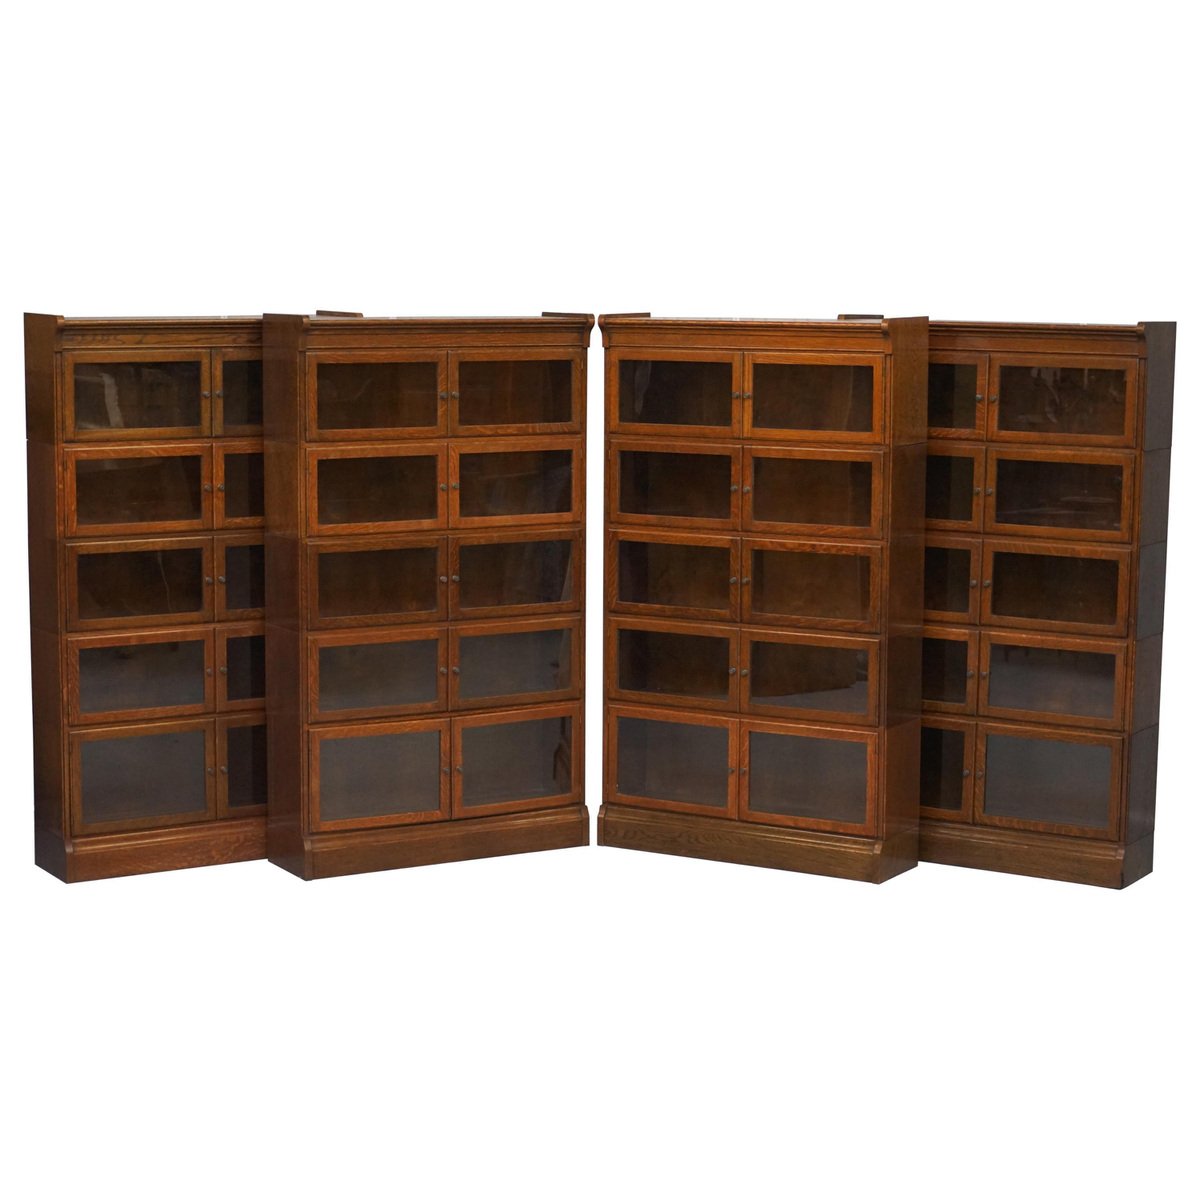 modular adjustable stacking legal library bookcases from minty oxford set of 4 GZP-1006519